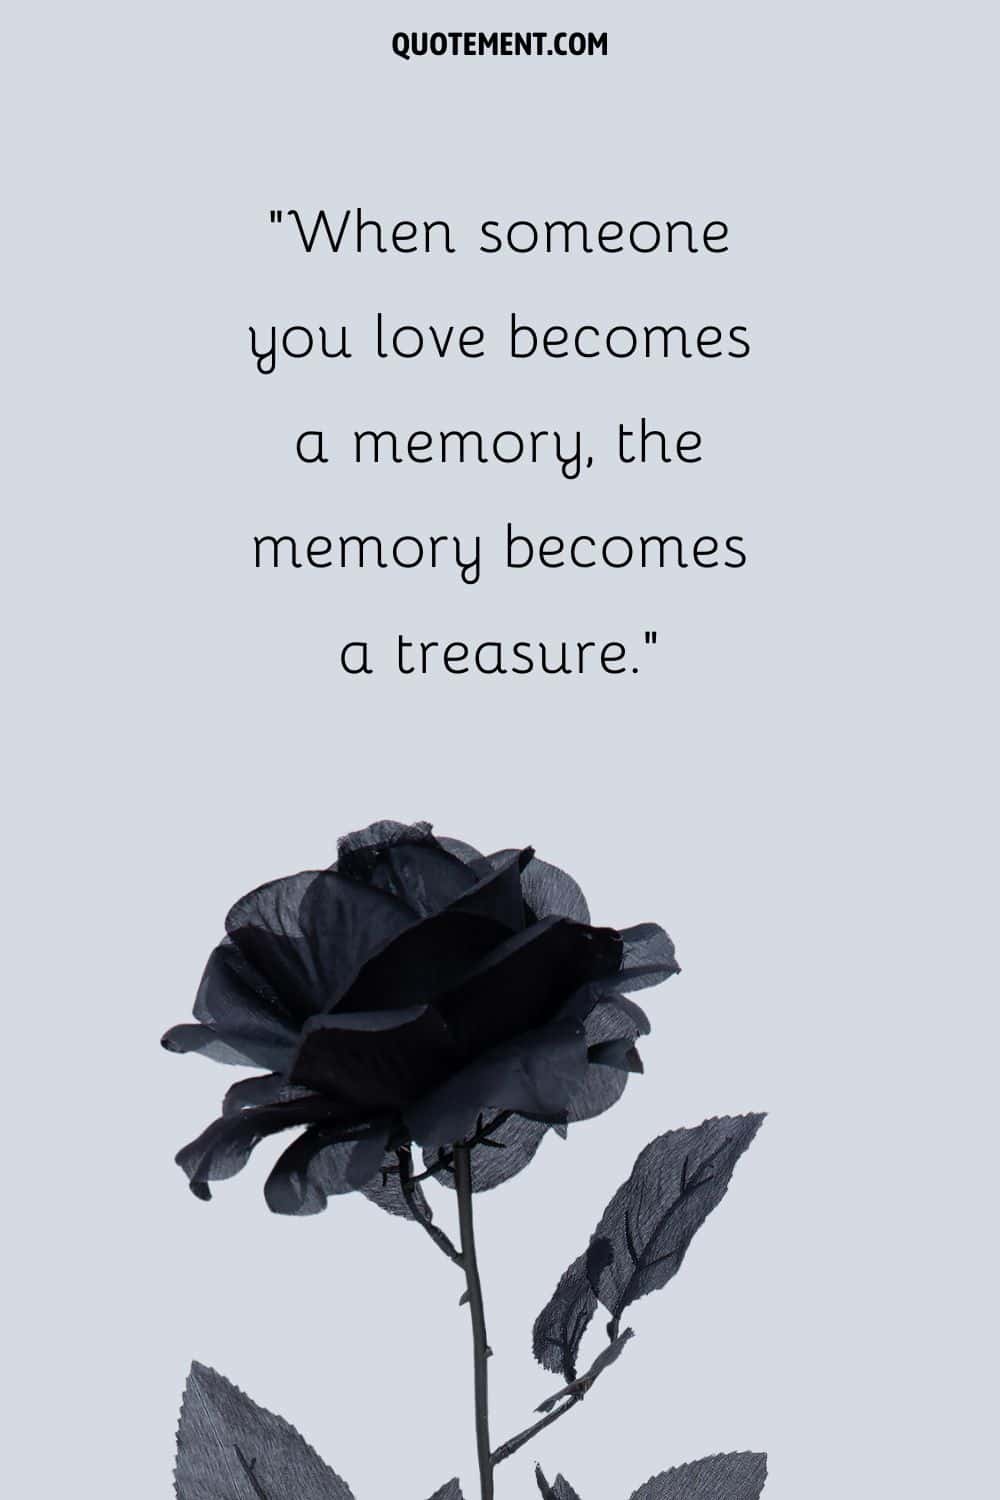 When someone you love becomes a memory, the memory becomes a treasure